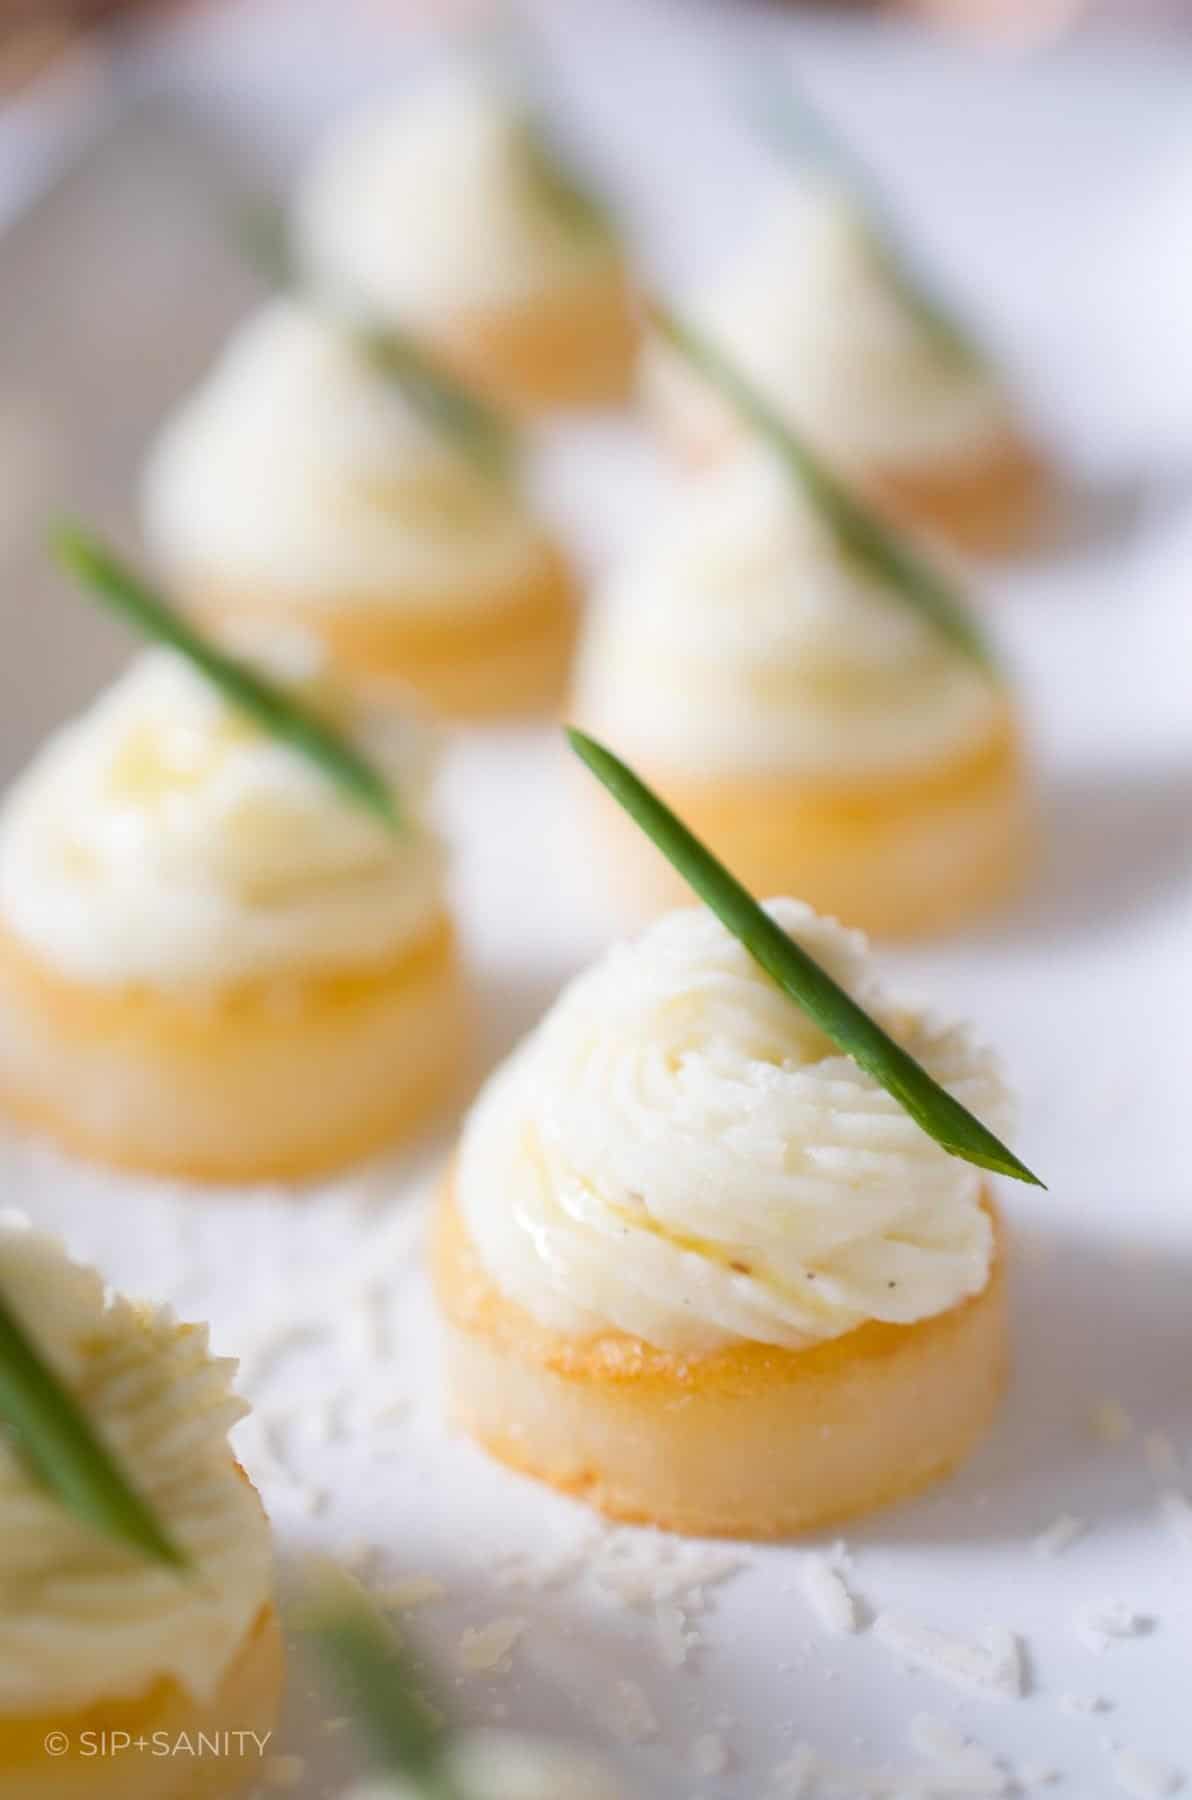 Round potato appetizers garnished with a chive sprig on a white dish.